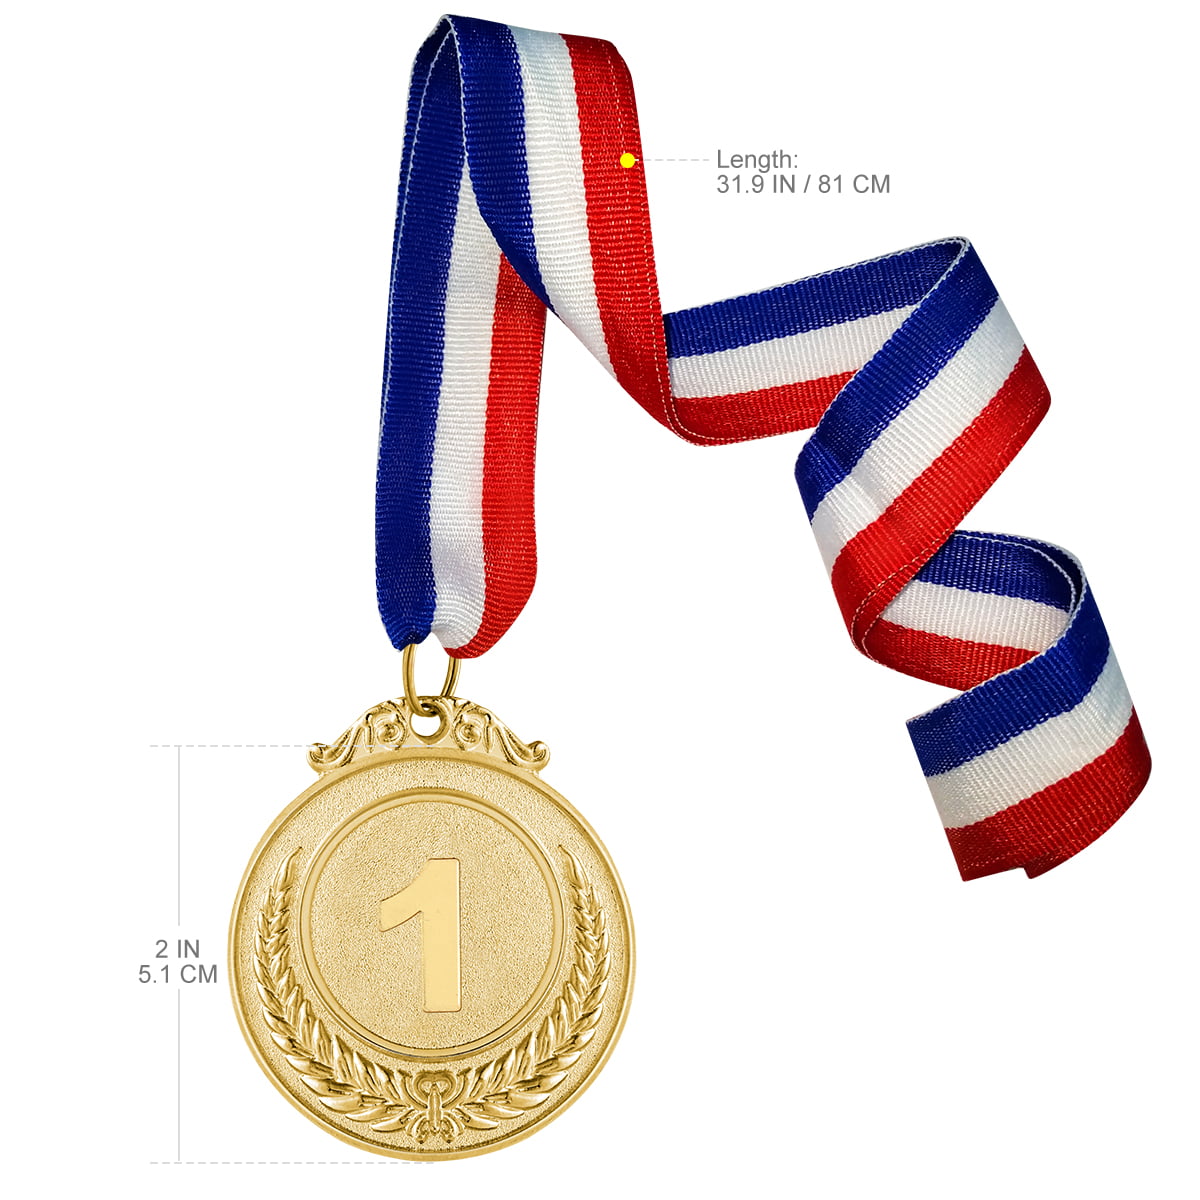 3PCS Gold Silver Bronze Metal Award Medals for Sports Academics Competition 